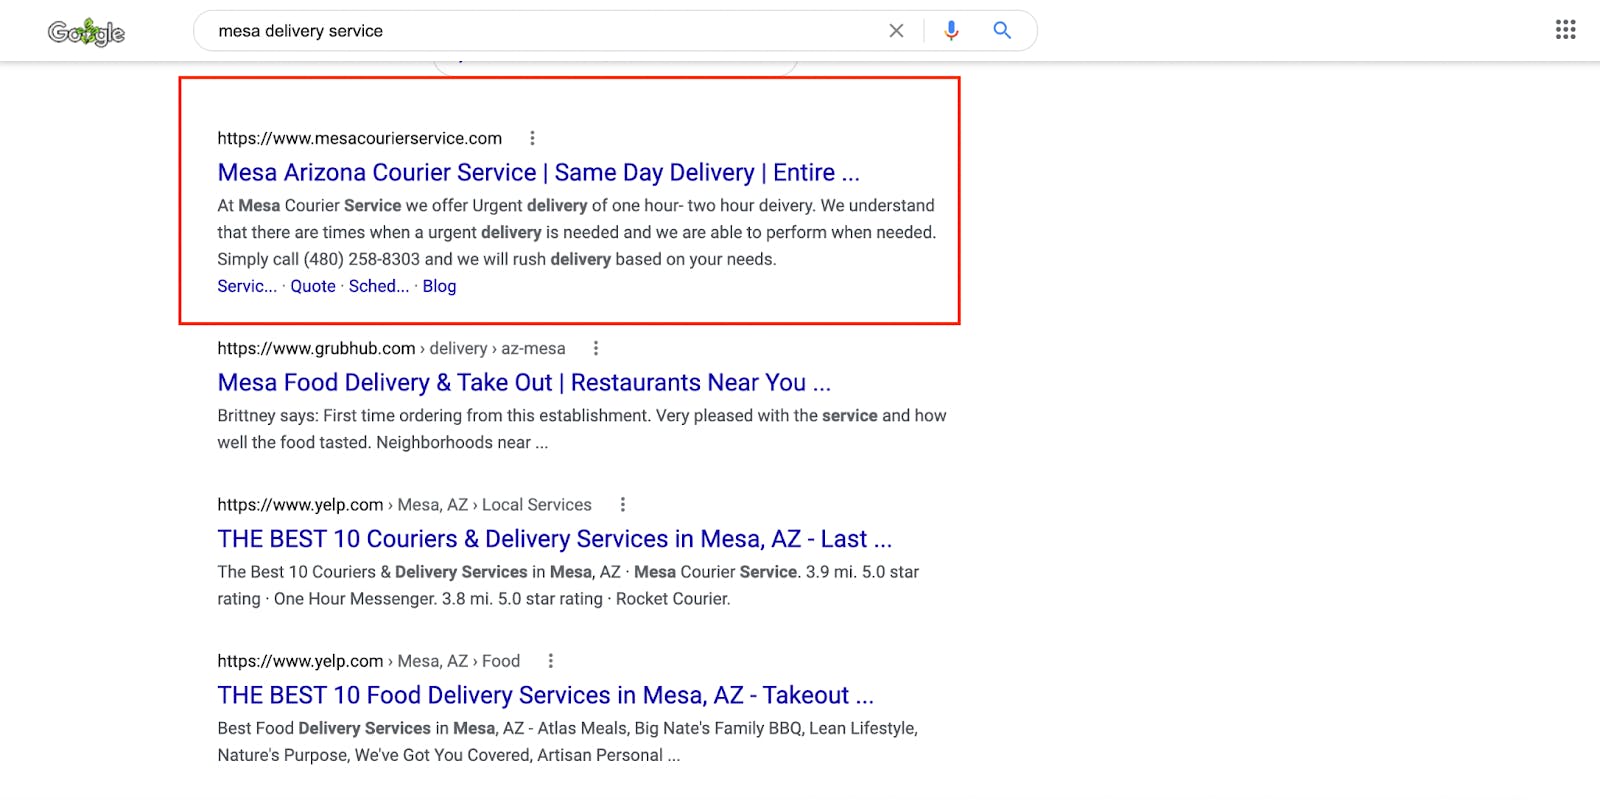 Screenshot shows example of Google results showing matching keywords to the search